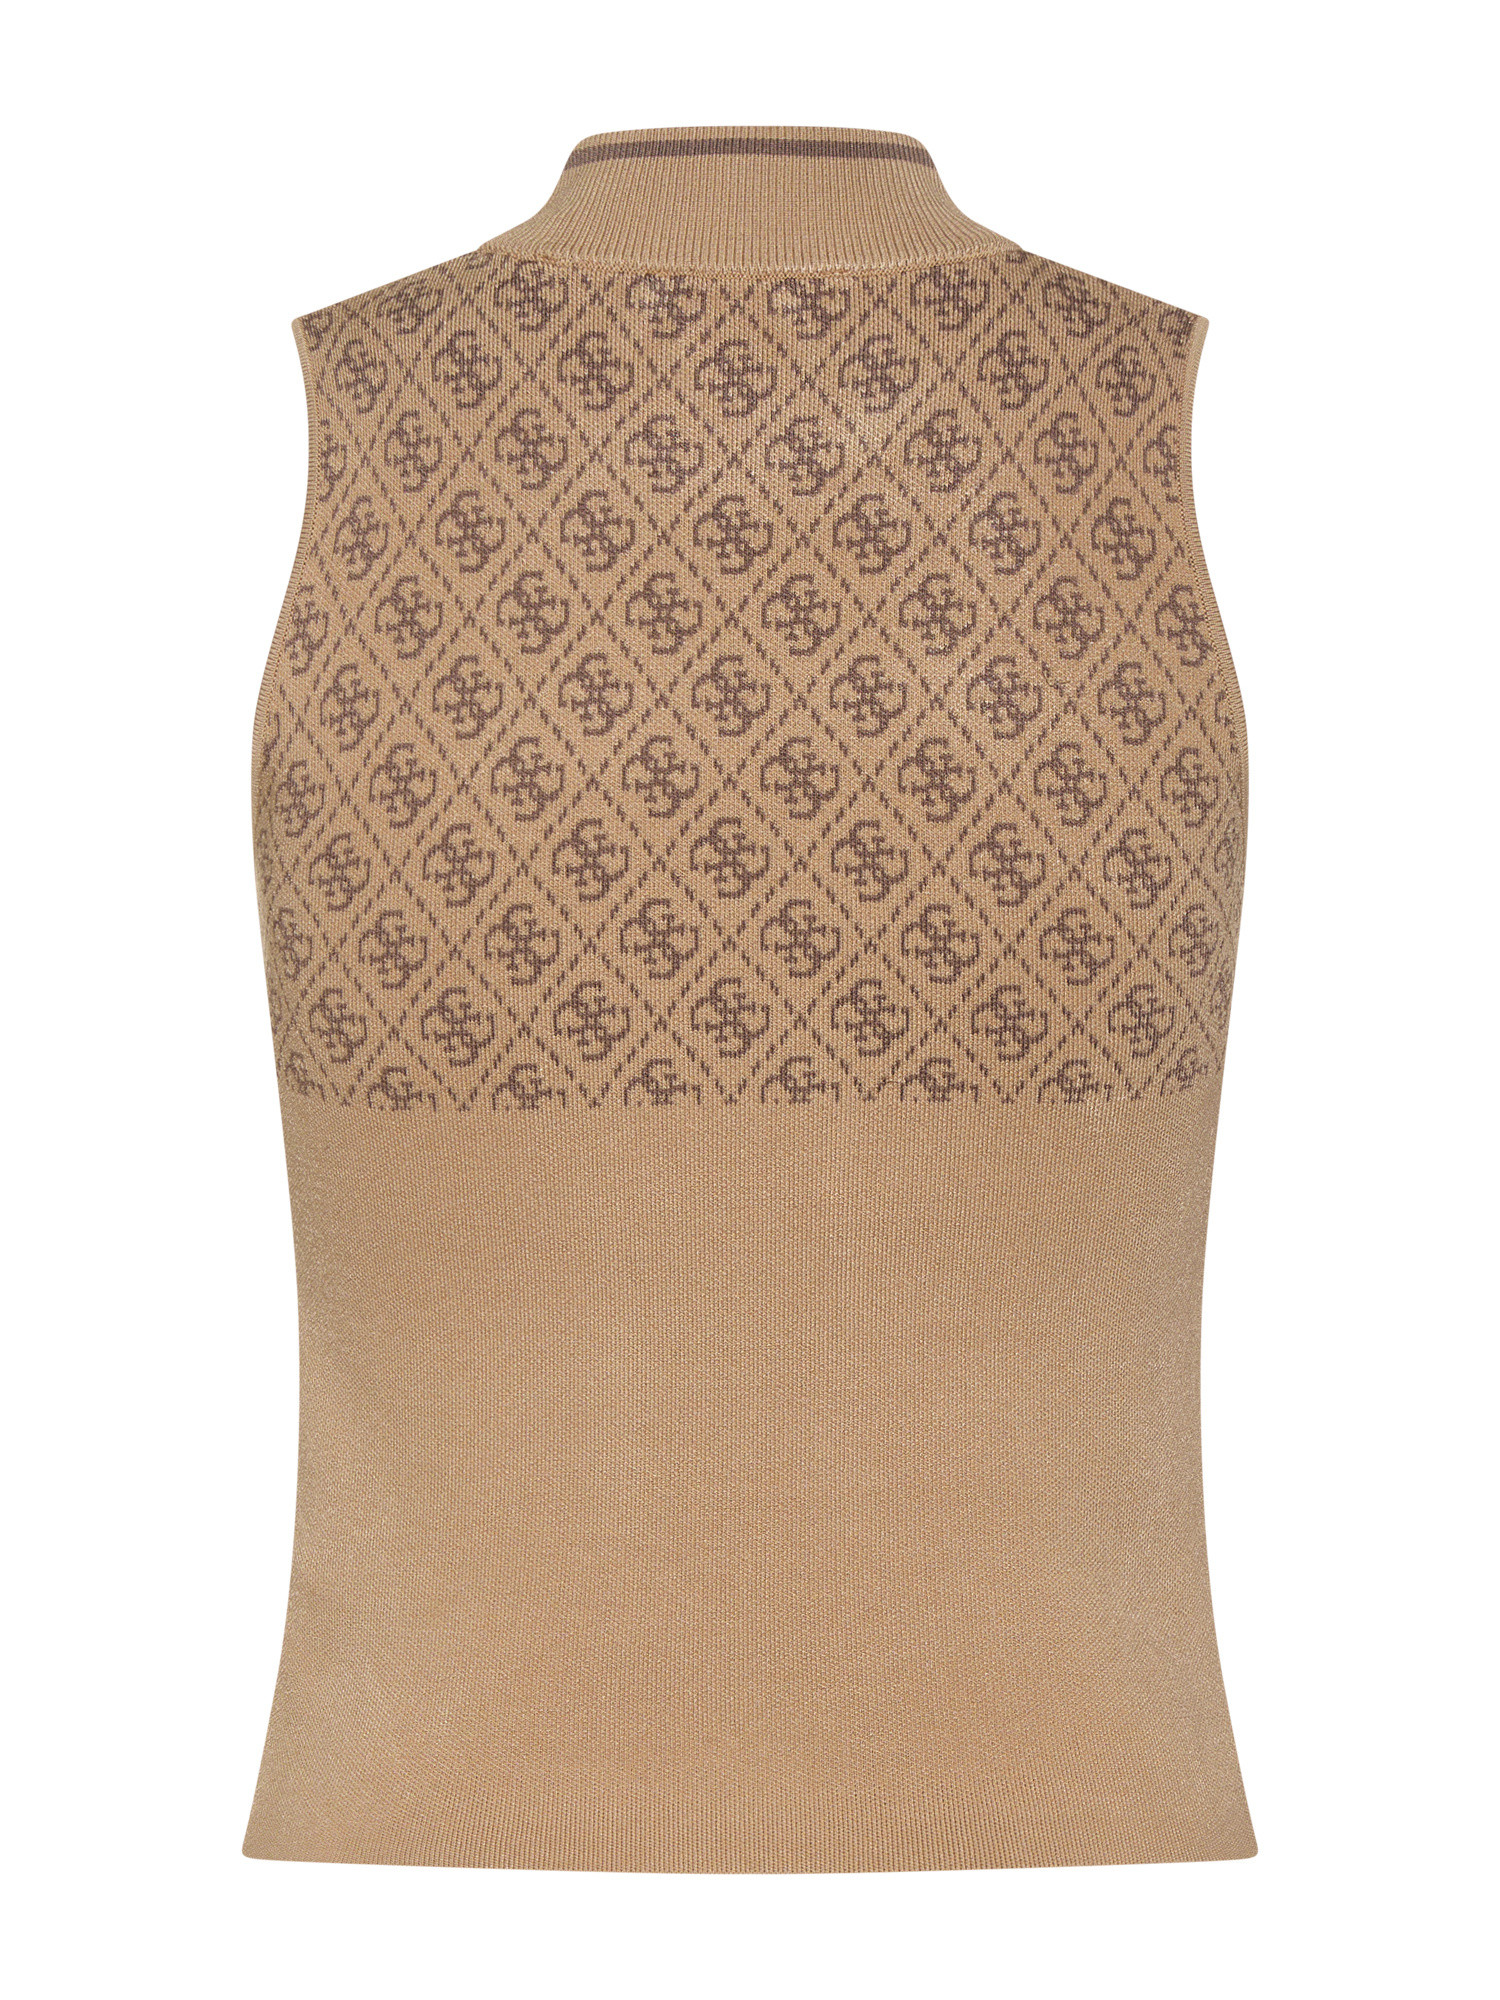 Guess - Top in maglia con logo, Beige, large image number 1